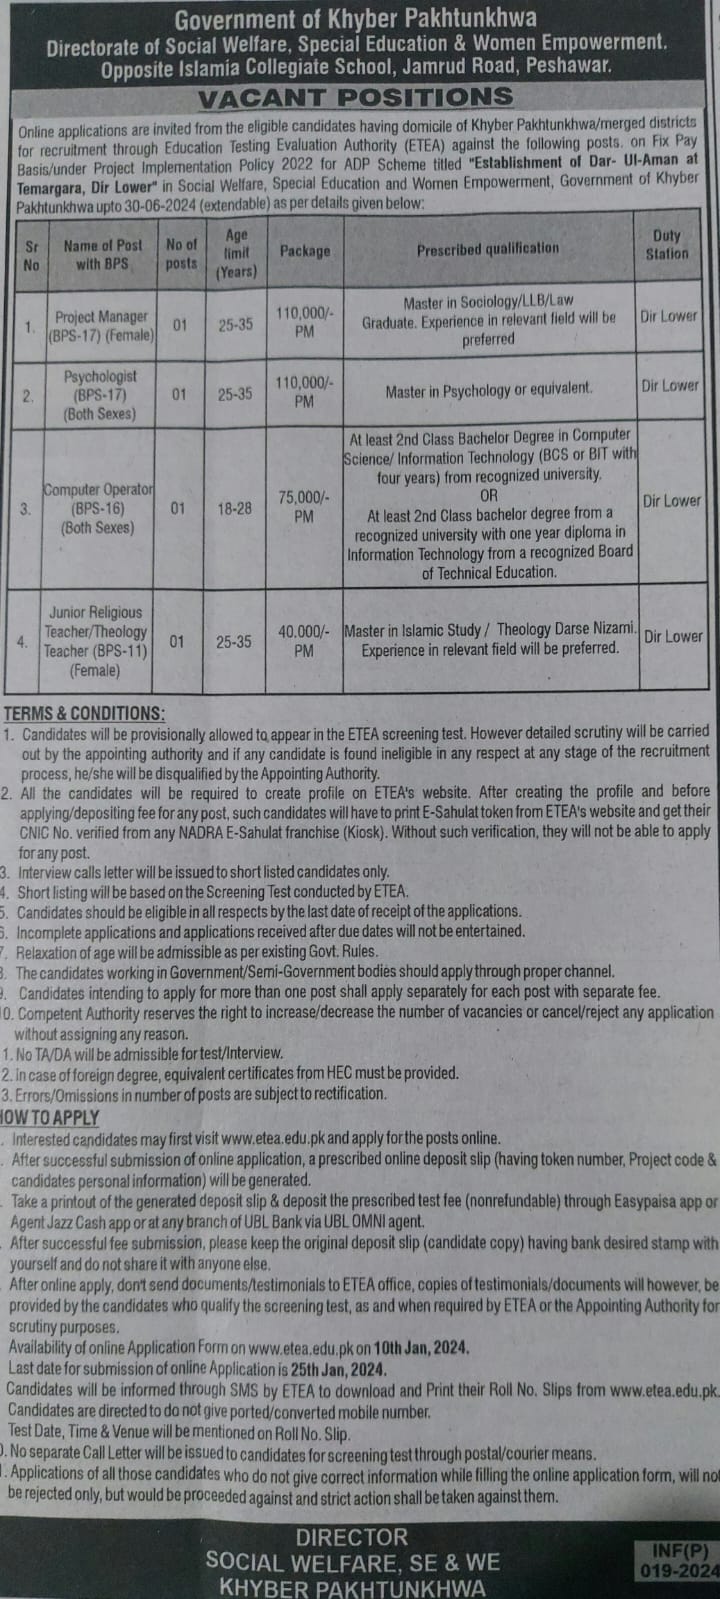 JOBS IN Government of Khyber Pakhtunkhwa Directorate of Social Welfare, Special Education & Women Empowerment. Opposite Islamia Collegiate School, Jamrud Road, Peshawar, jobs, jobs in peshawar, jobs in dir, vacant position, jobs near me